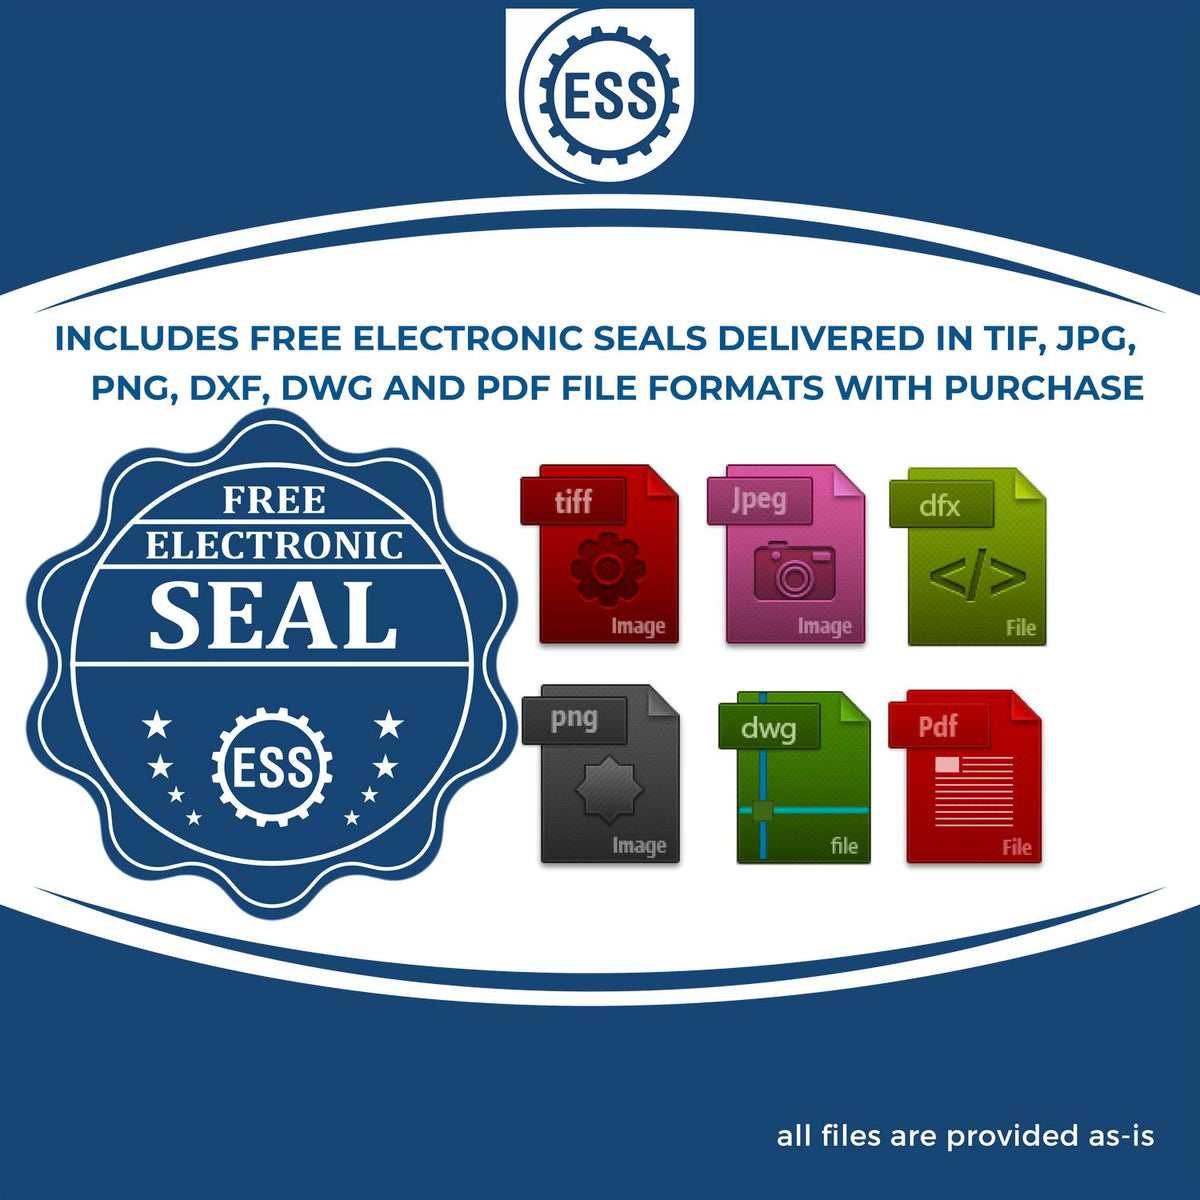 An infographic for the free electronic seal for the Self-Inking South Carolina Geologist Stamp illustrating the different file type icons such as DXF, DWG, TIF, JPG and PNG.